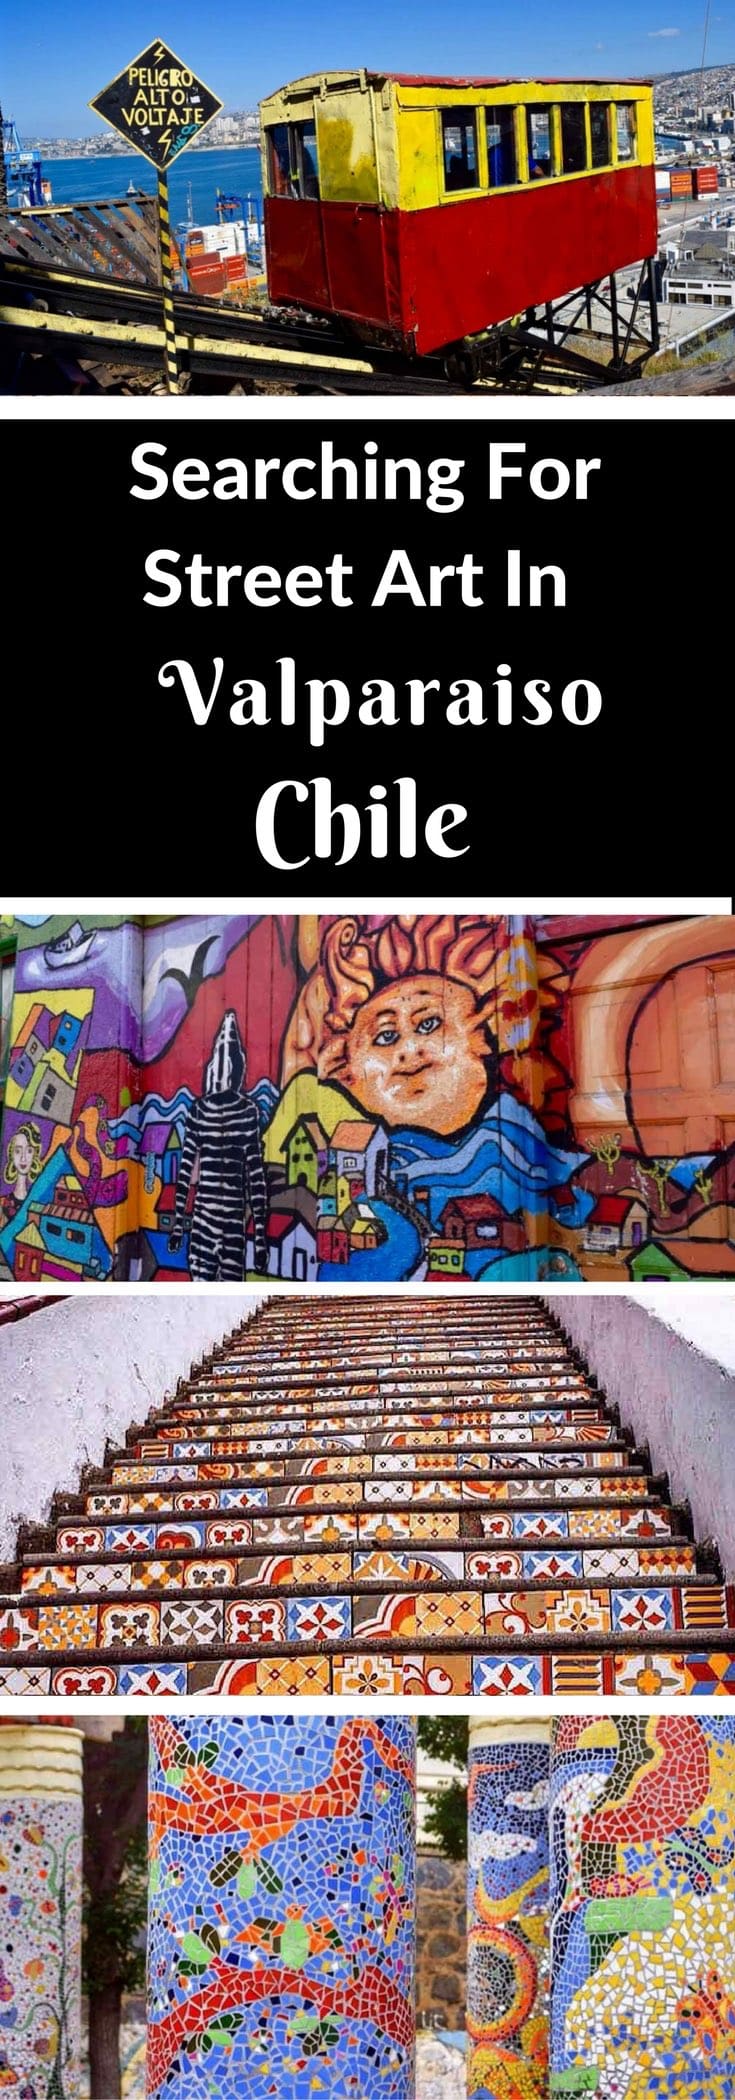 Searching For Street Art In Valparaiso, Chile